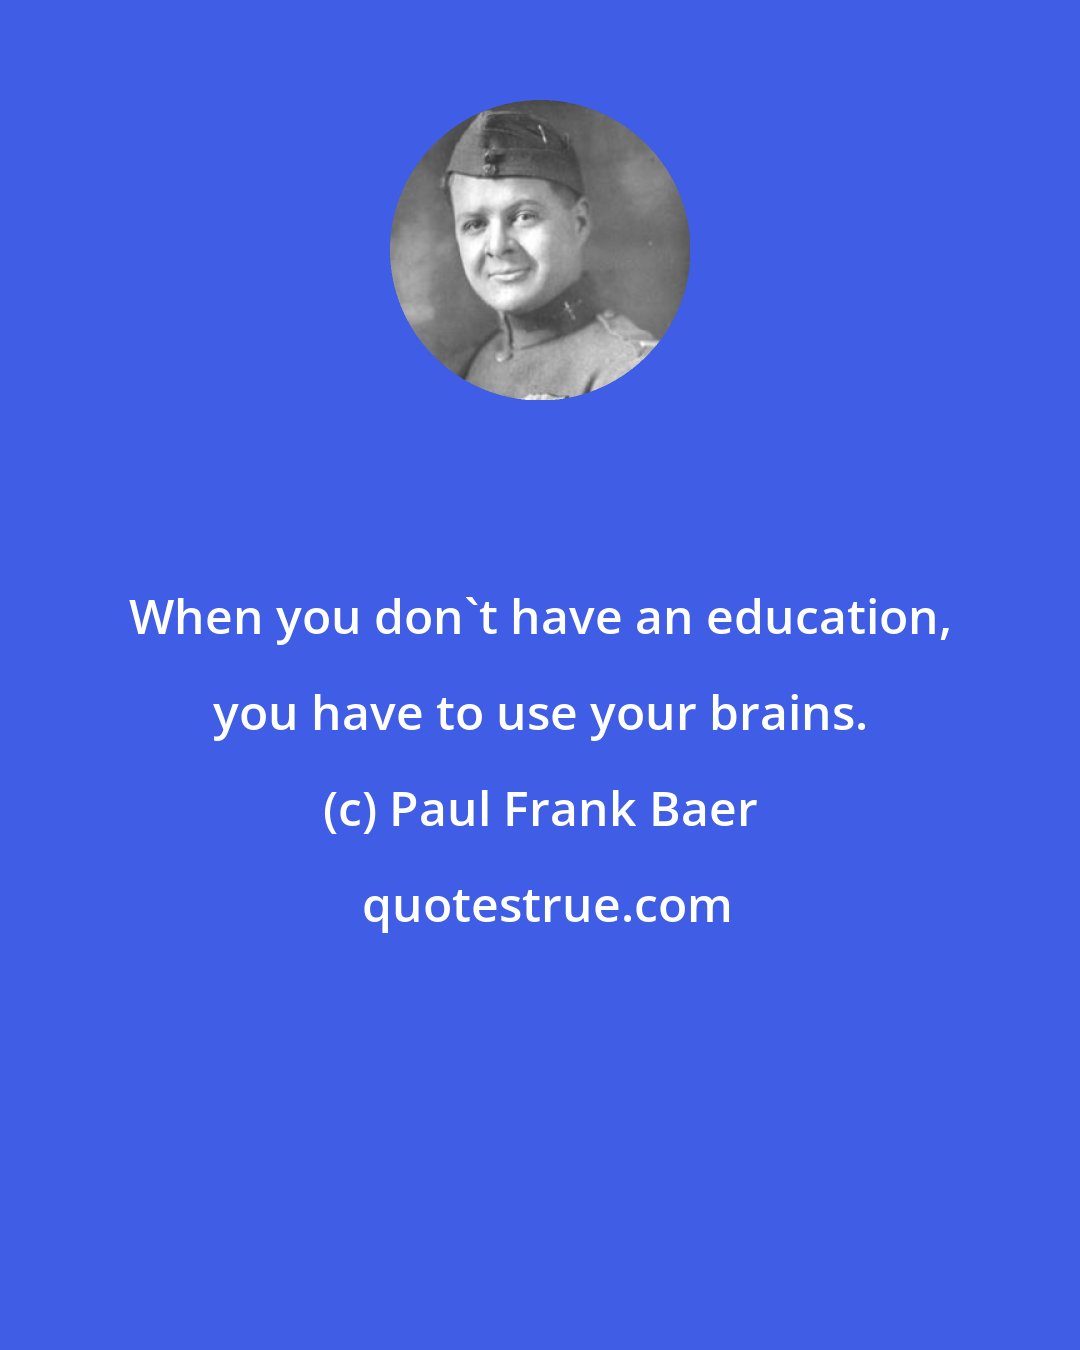 Paul Frank Baer: When you don't have an education, you have to use your brains.